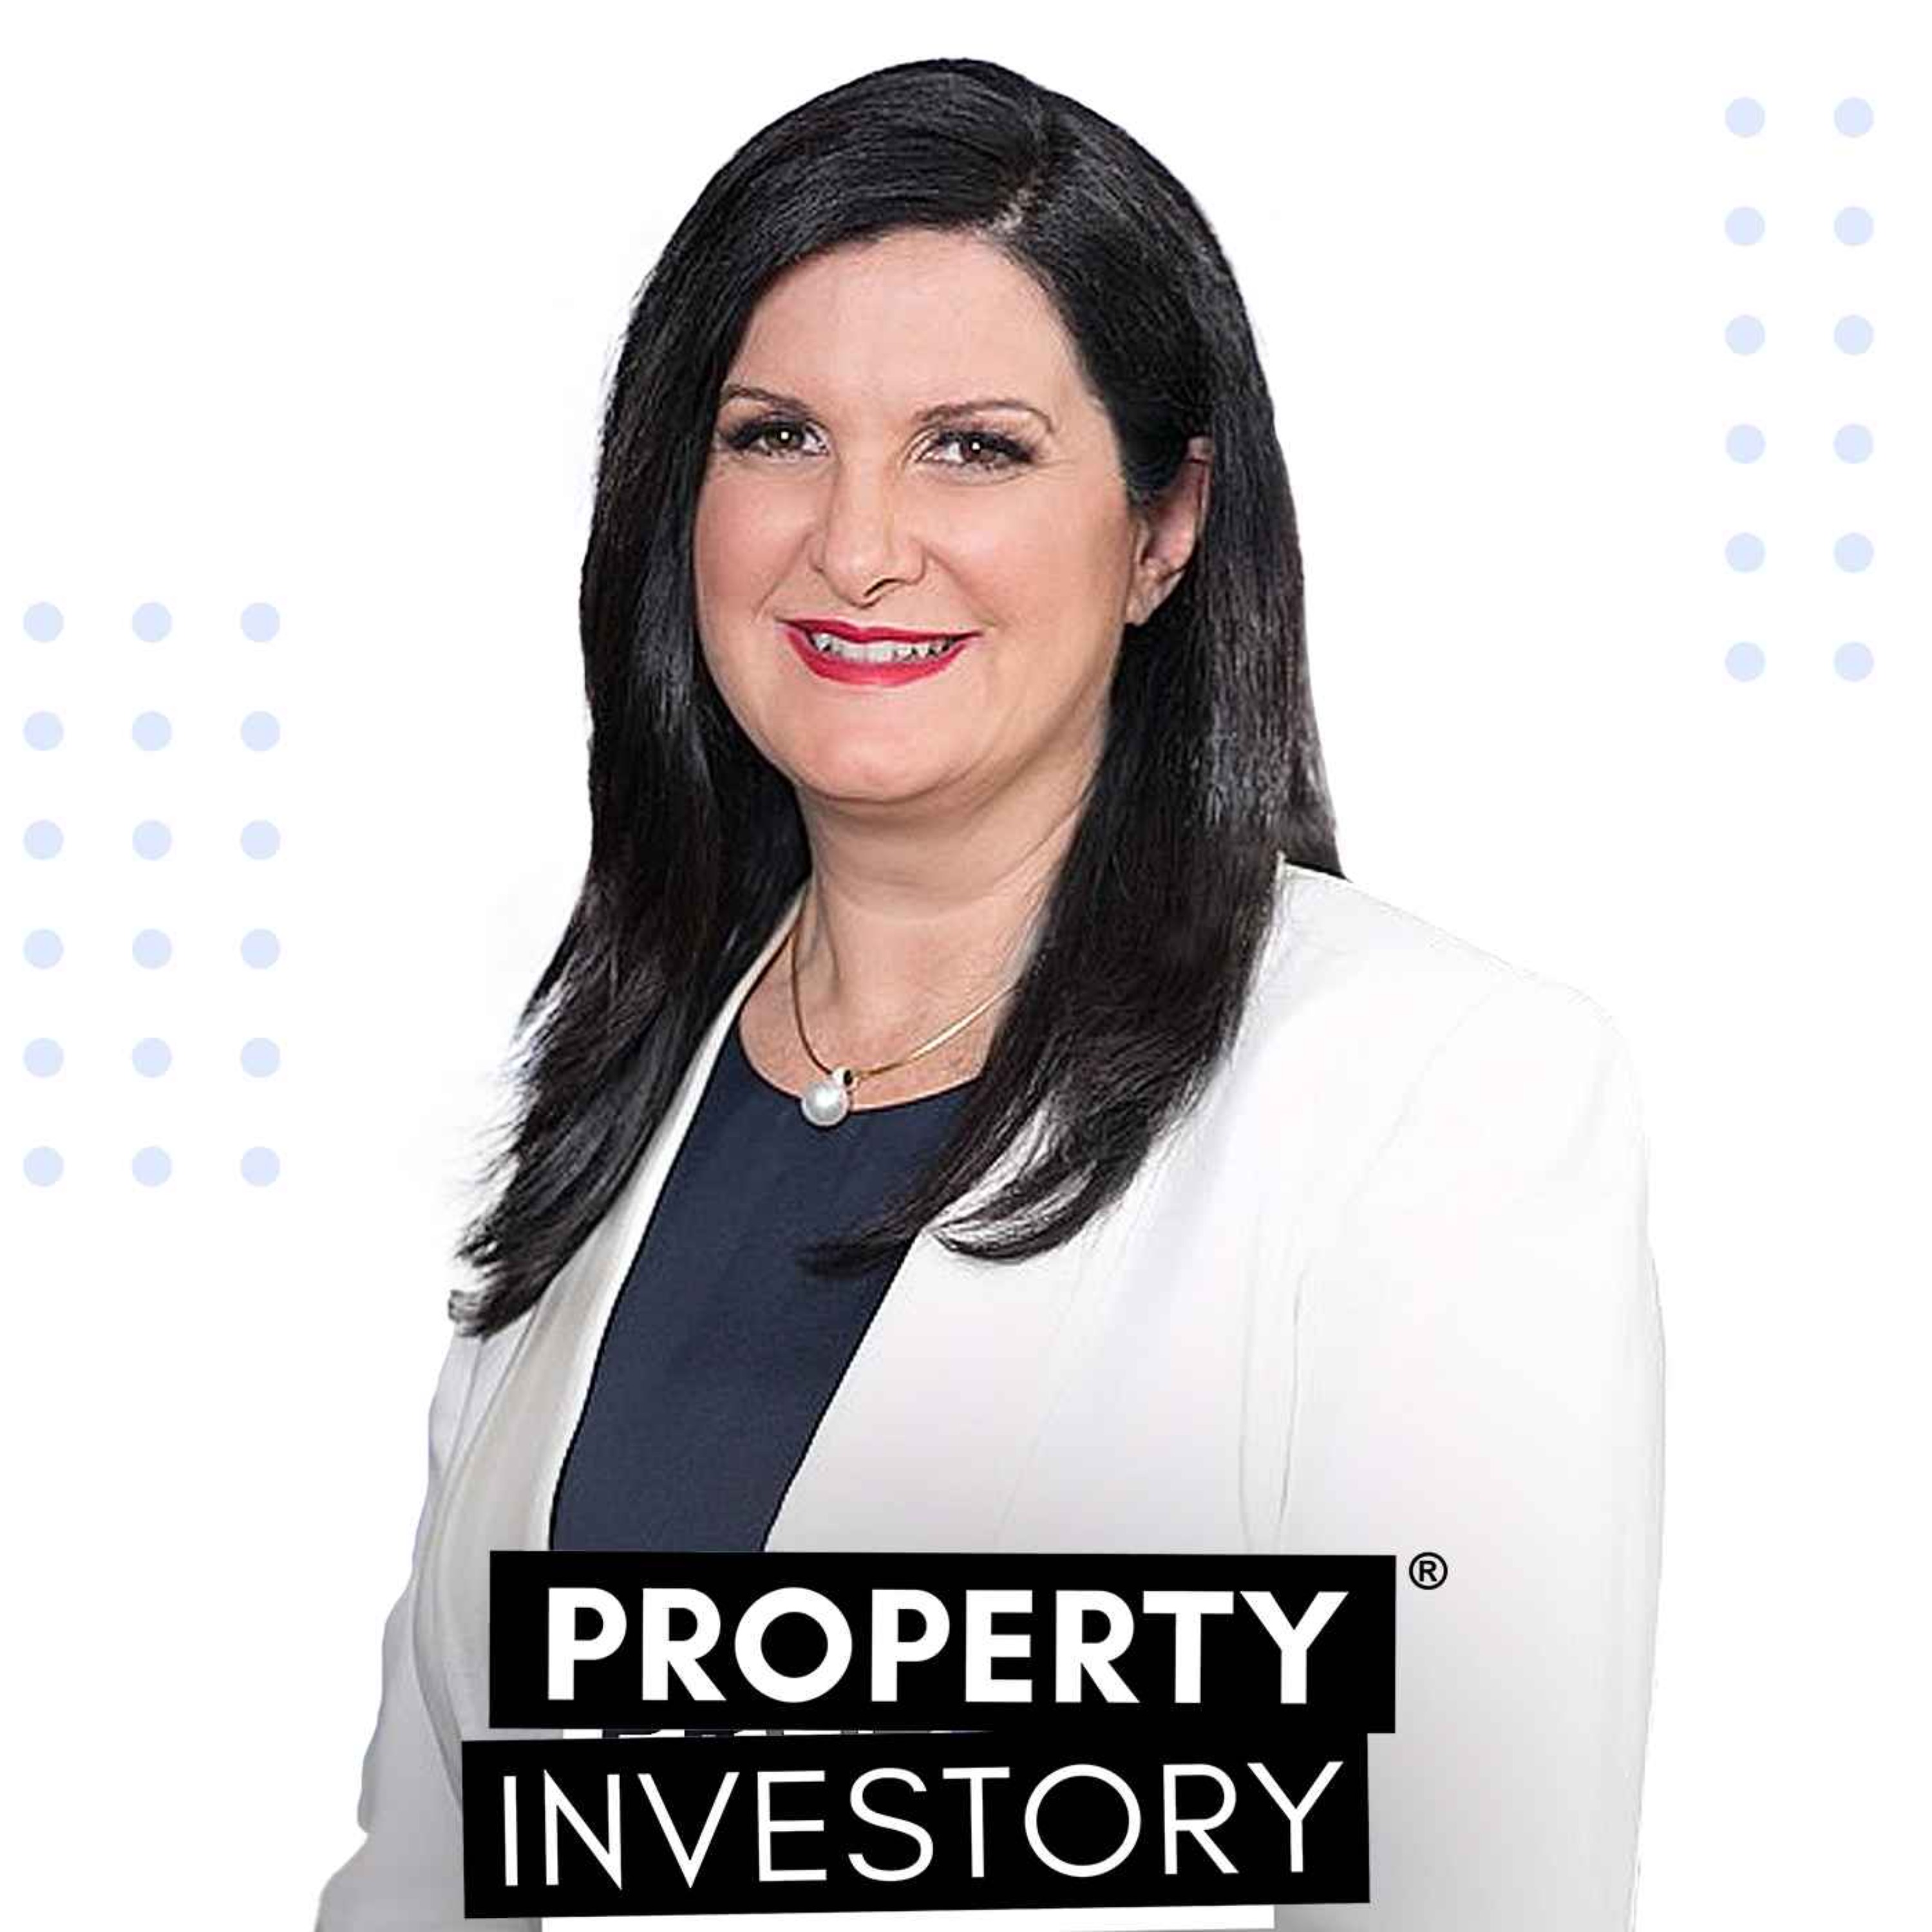 Property Development Pros and Cons with Dominique Grubisa